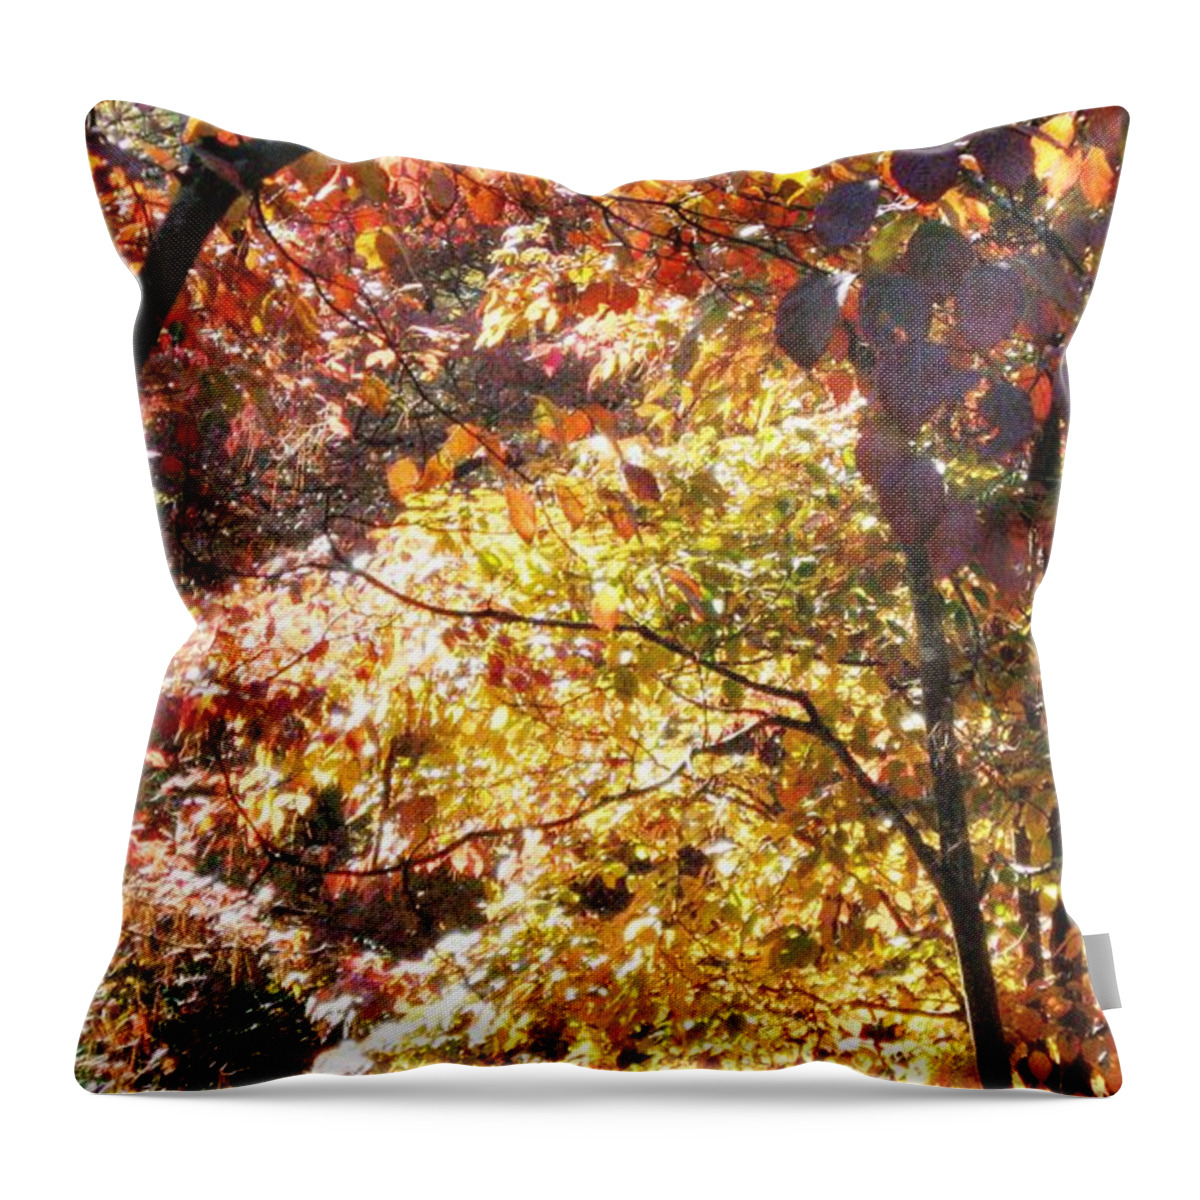 Autumn Throw Pillow featuring the photograph Vibrant Golden Autumn Trees by Catherine Ludwig Donleycott